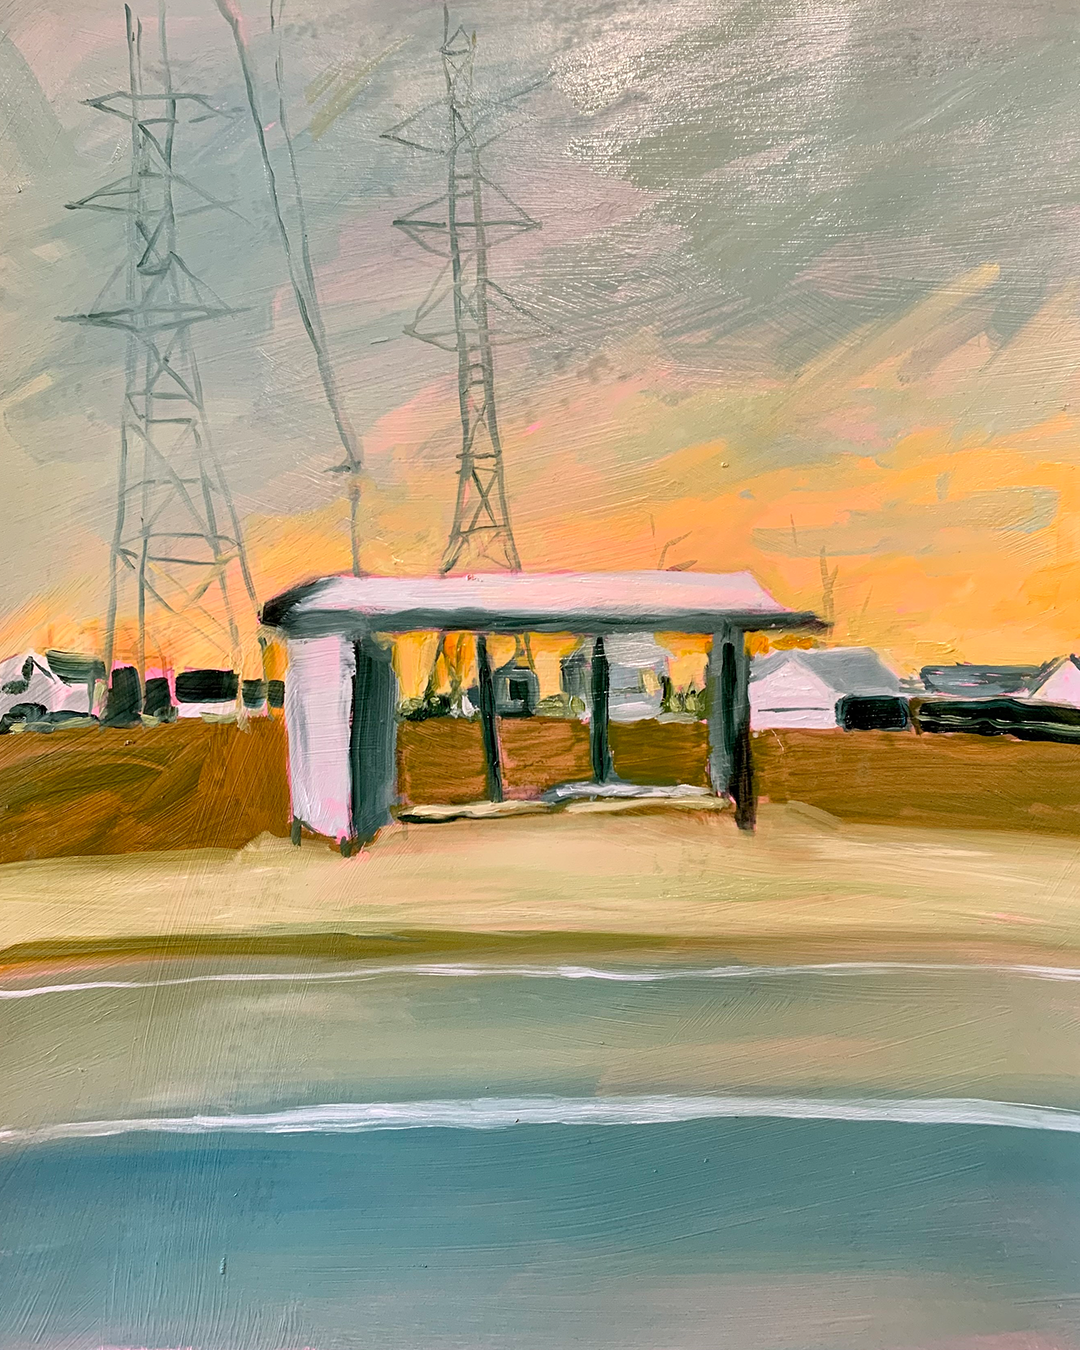 An illustration of a pink bus shelter against a sunset